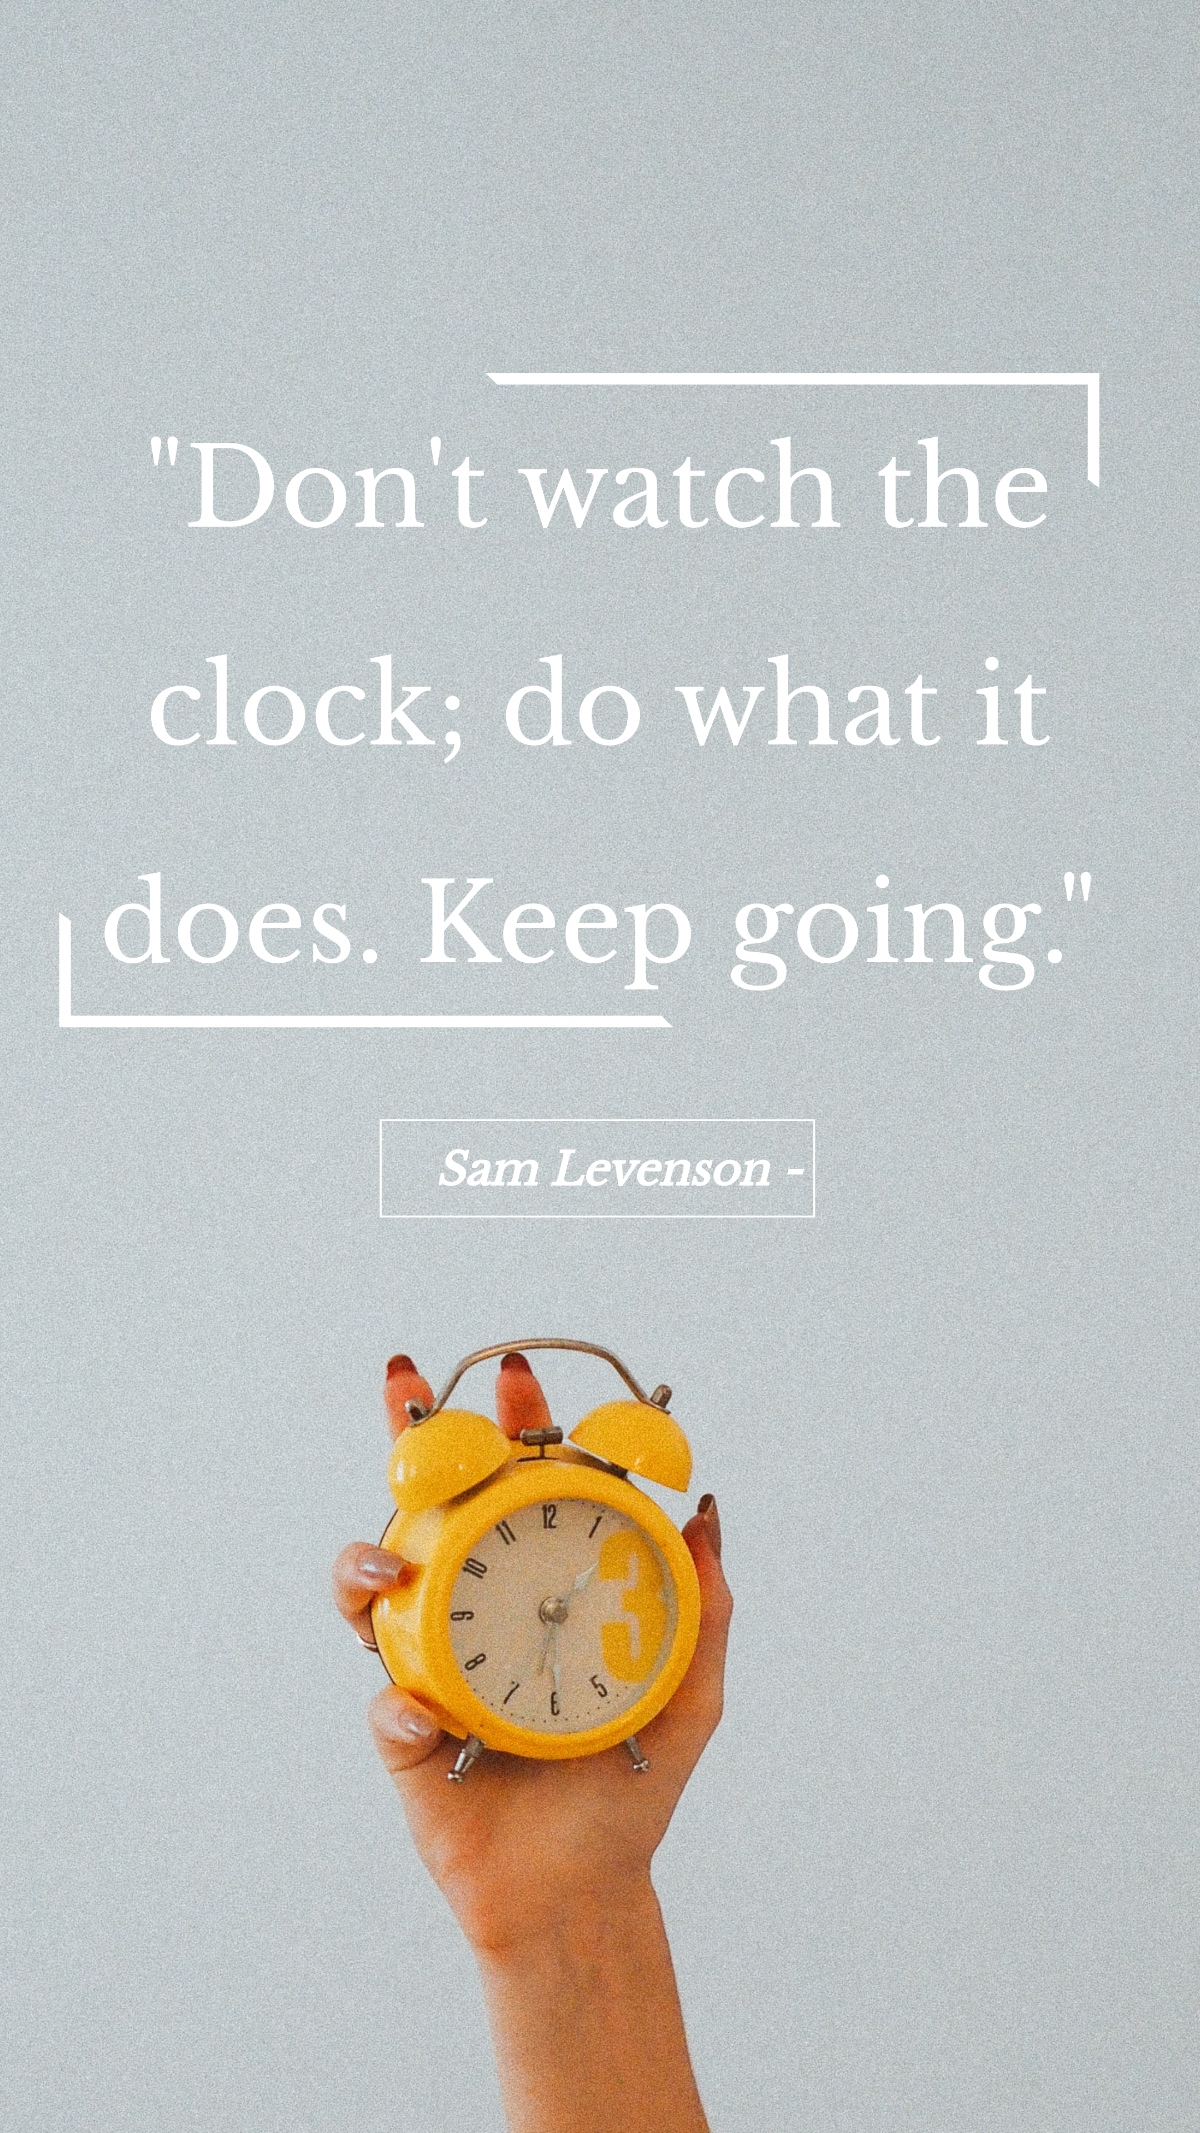 Sam Levenson - Don't watch the clock; do what it does. Keep going.